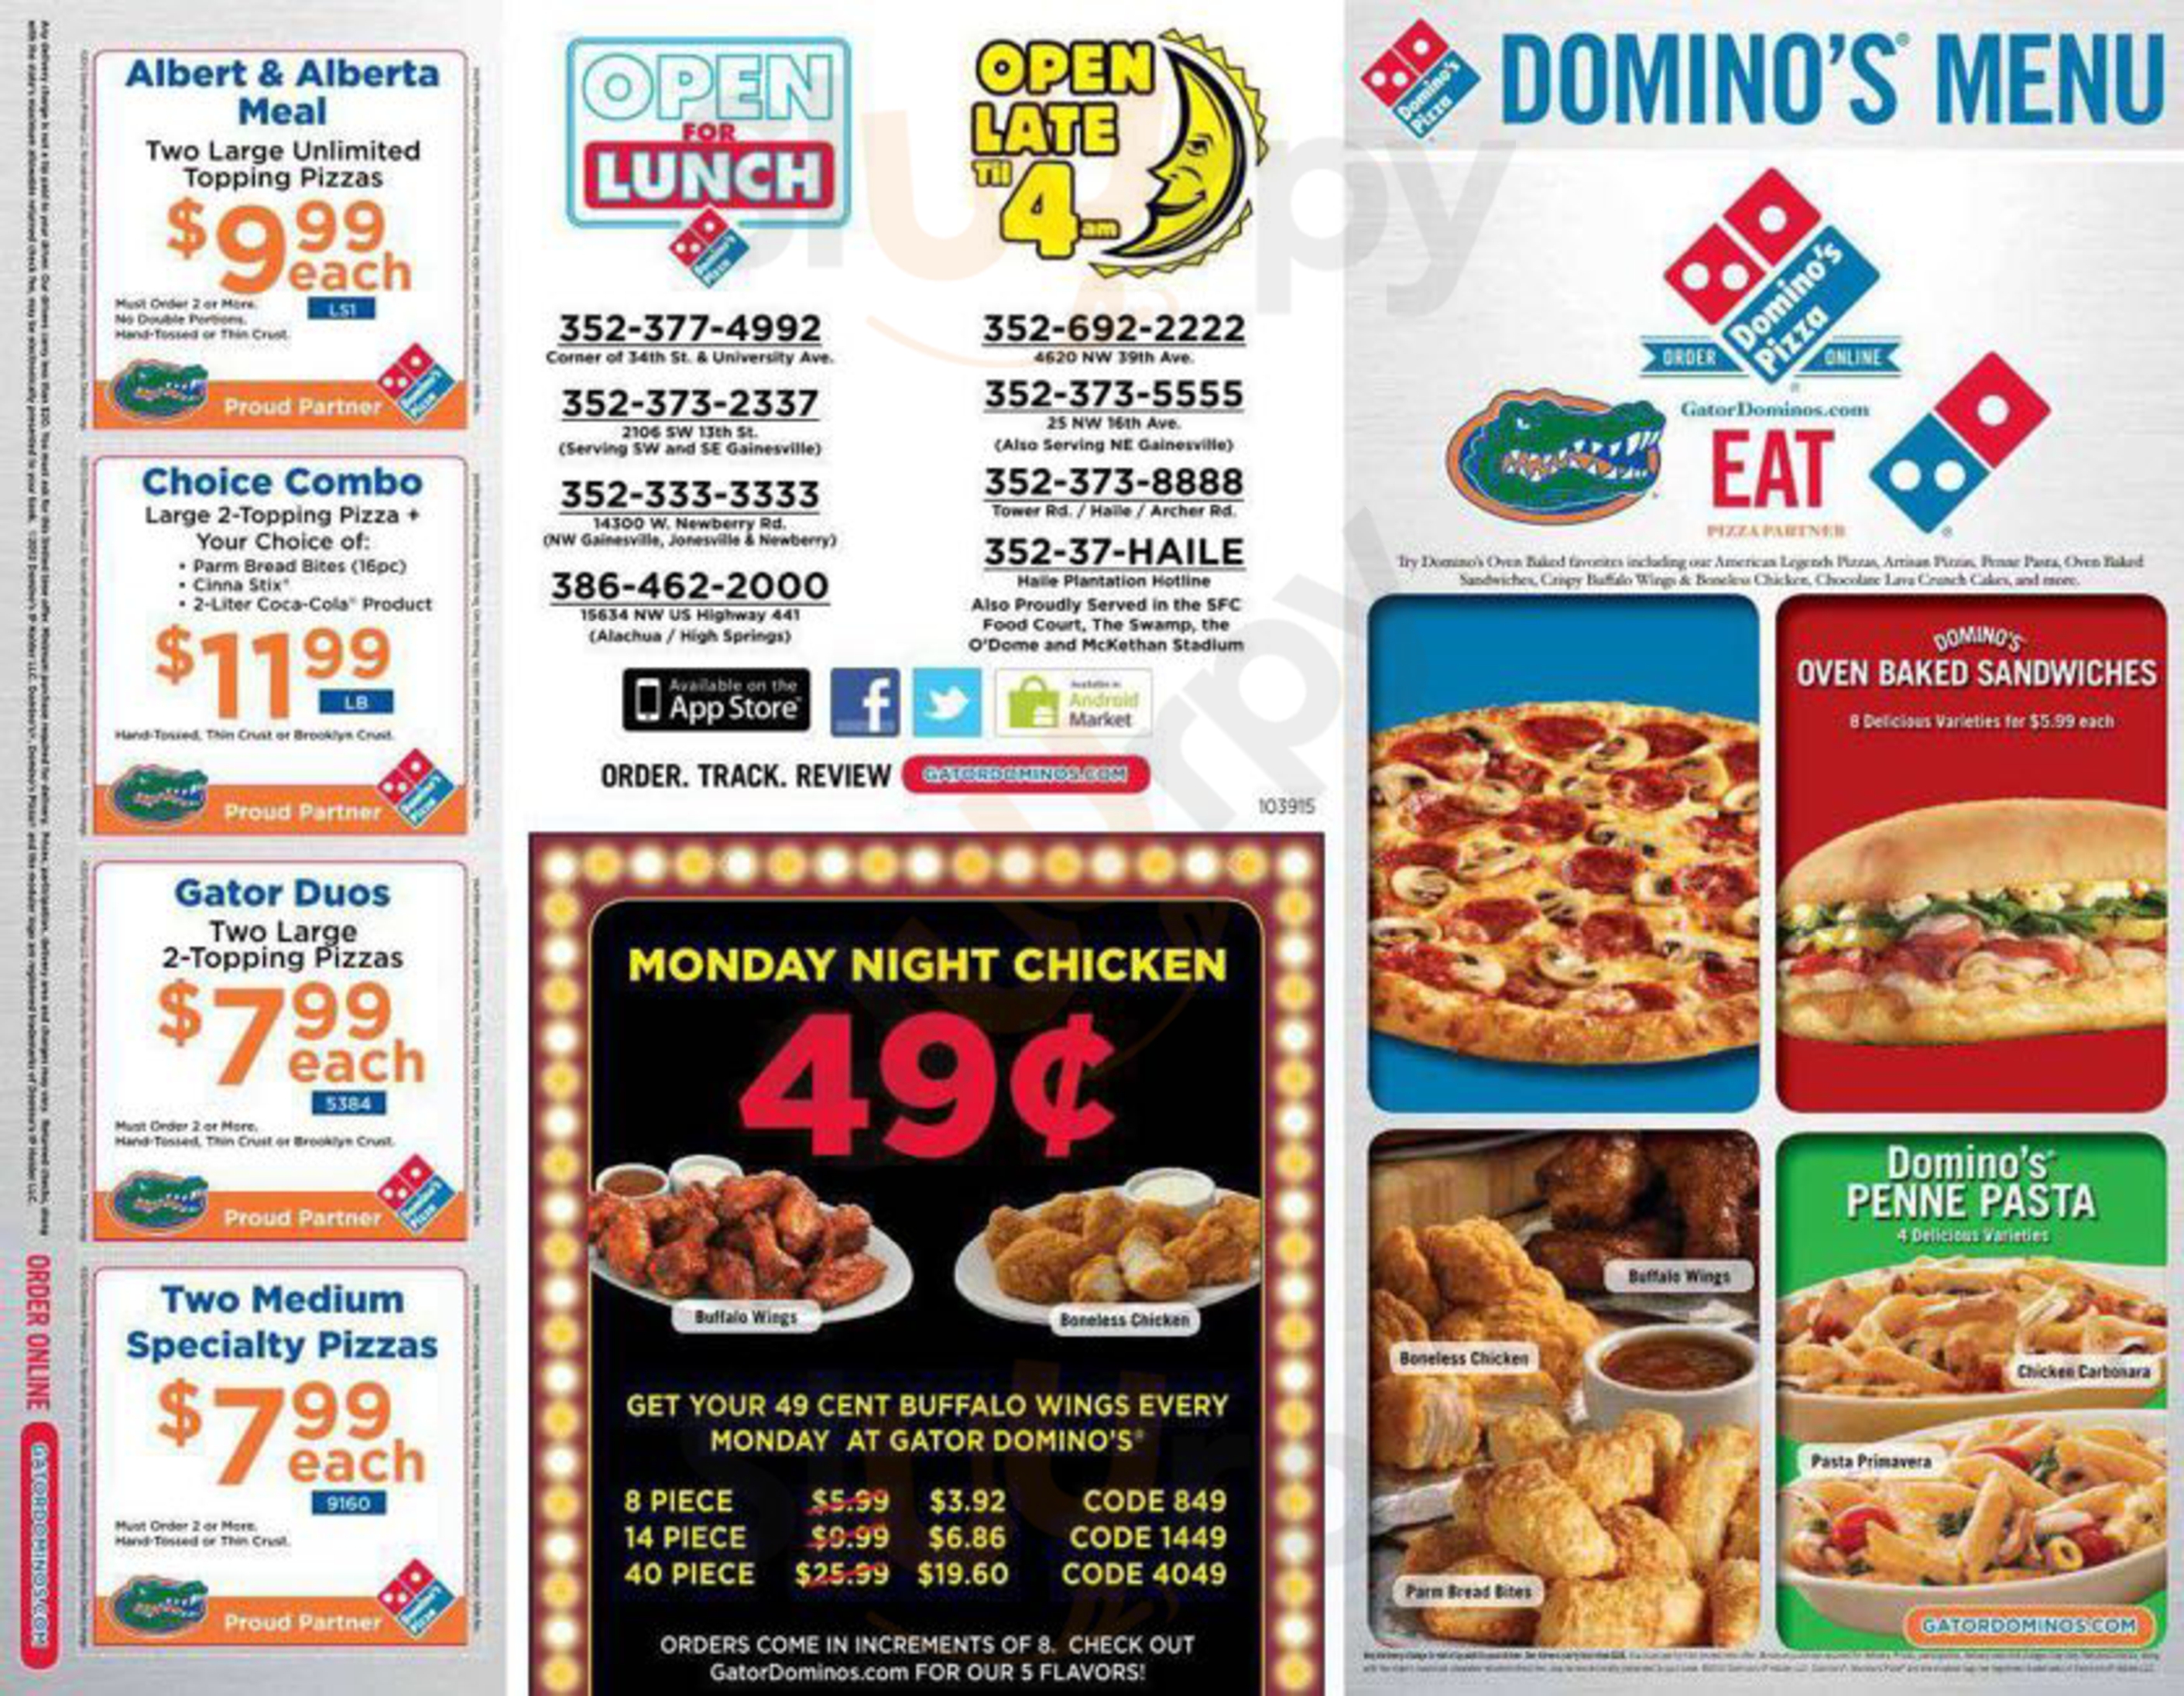 Domino's Pizza Gloucester Point Menu - 1